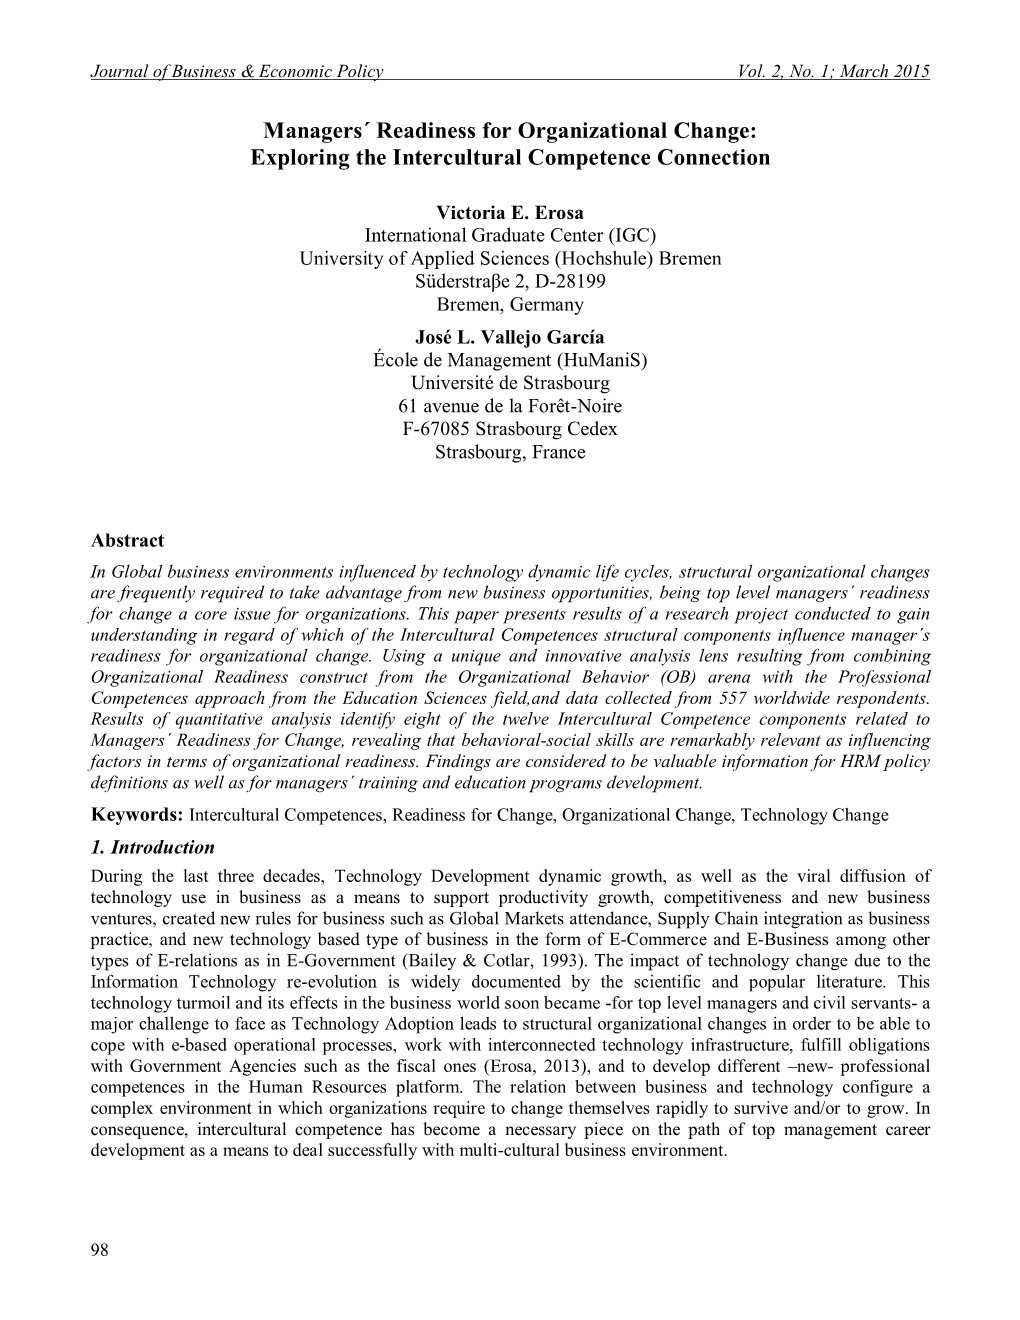 Managers´ Readiness for Organizational Change: Exploring the Intercultural Competence Connection